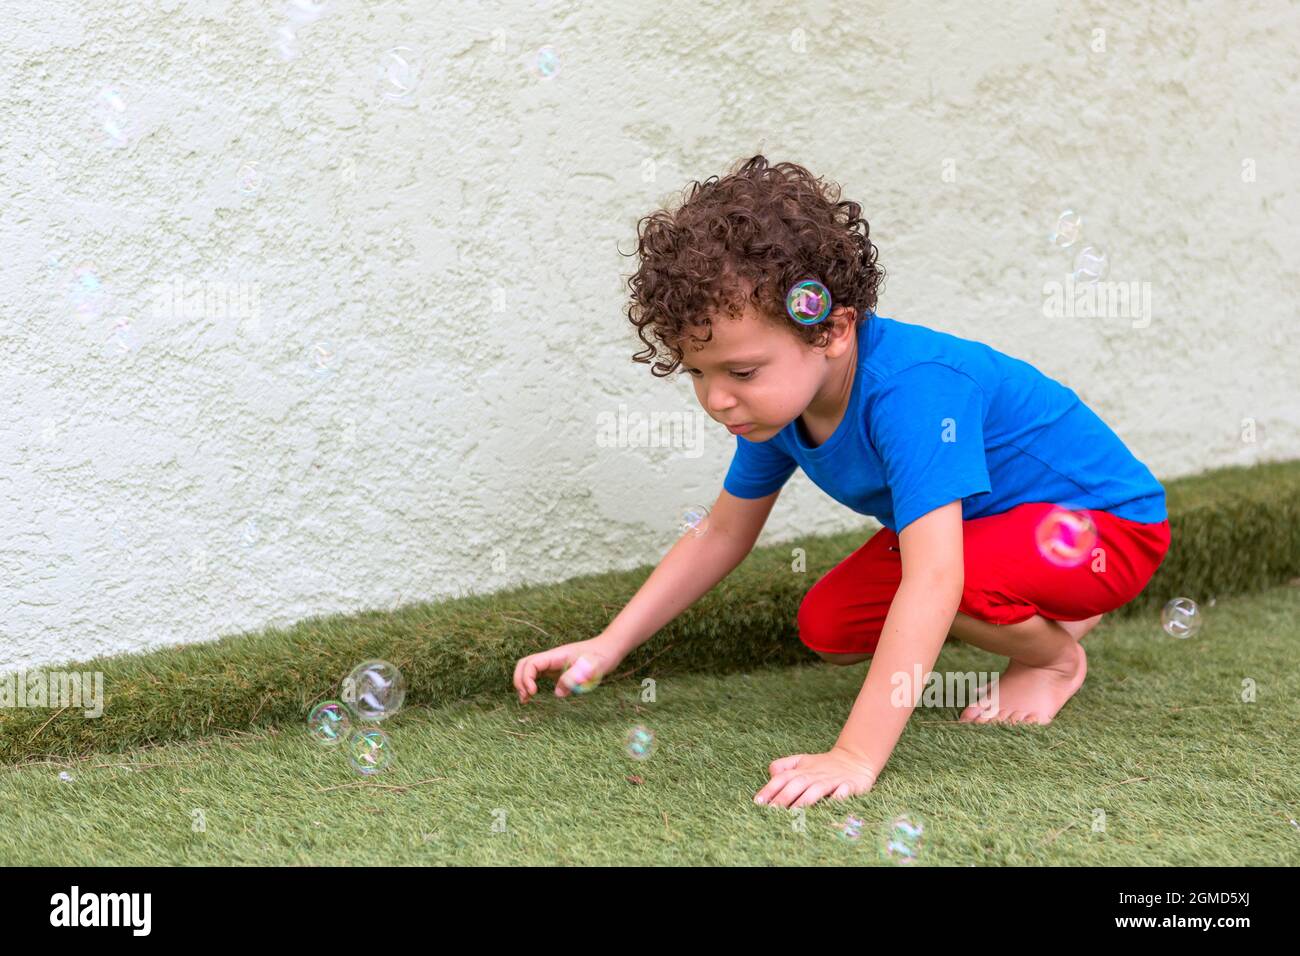 beautiful 4-5 year old caucasian boy with curly hair in his backyard playing with soap bubbles Stock Photo